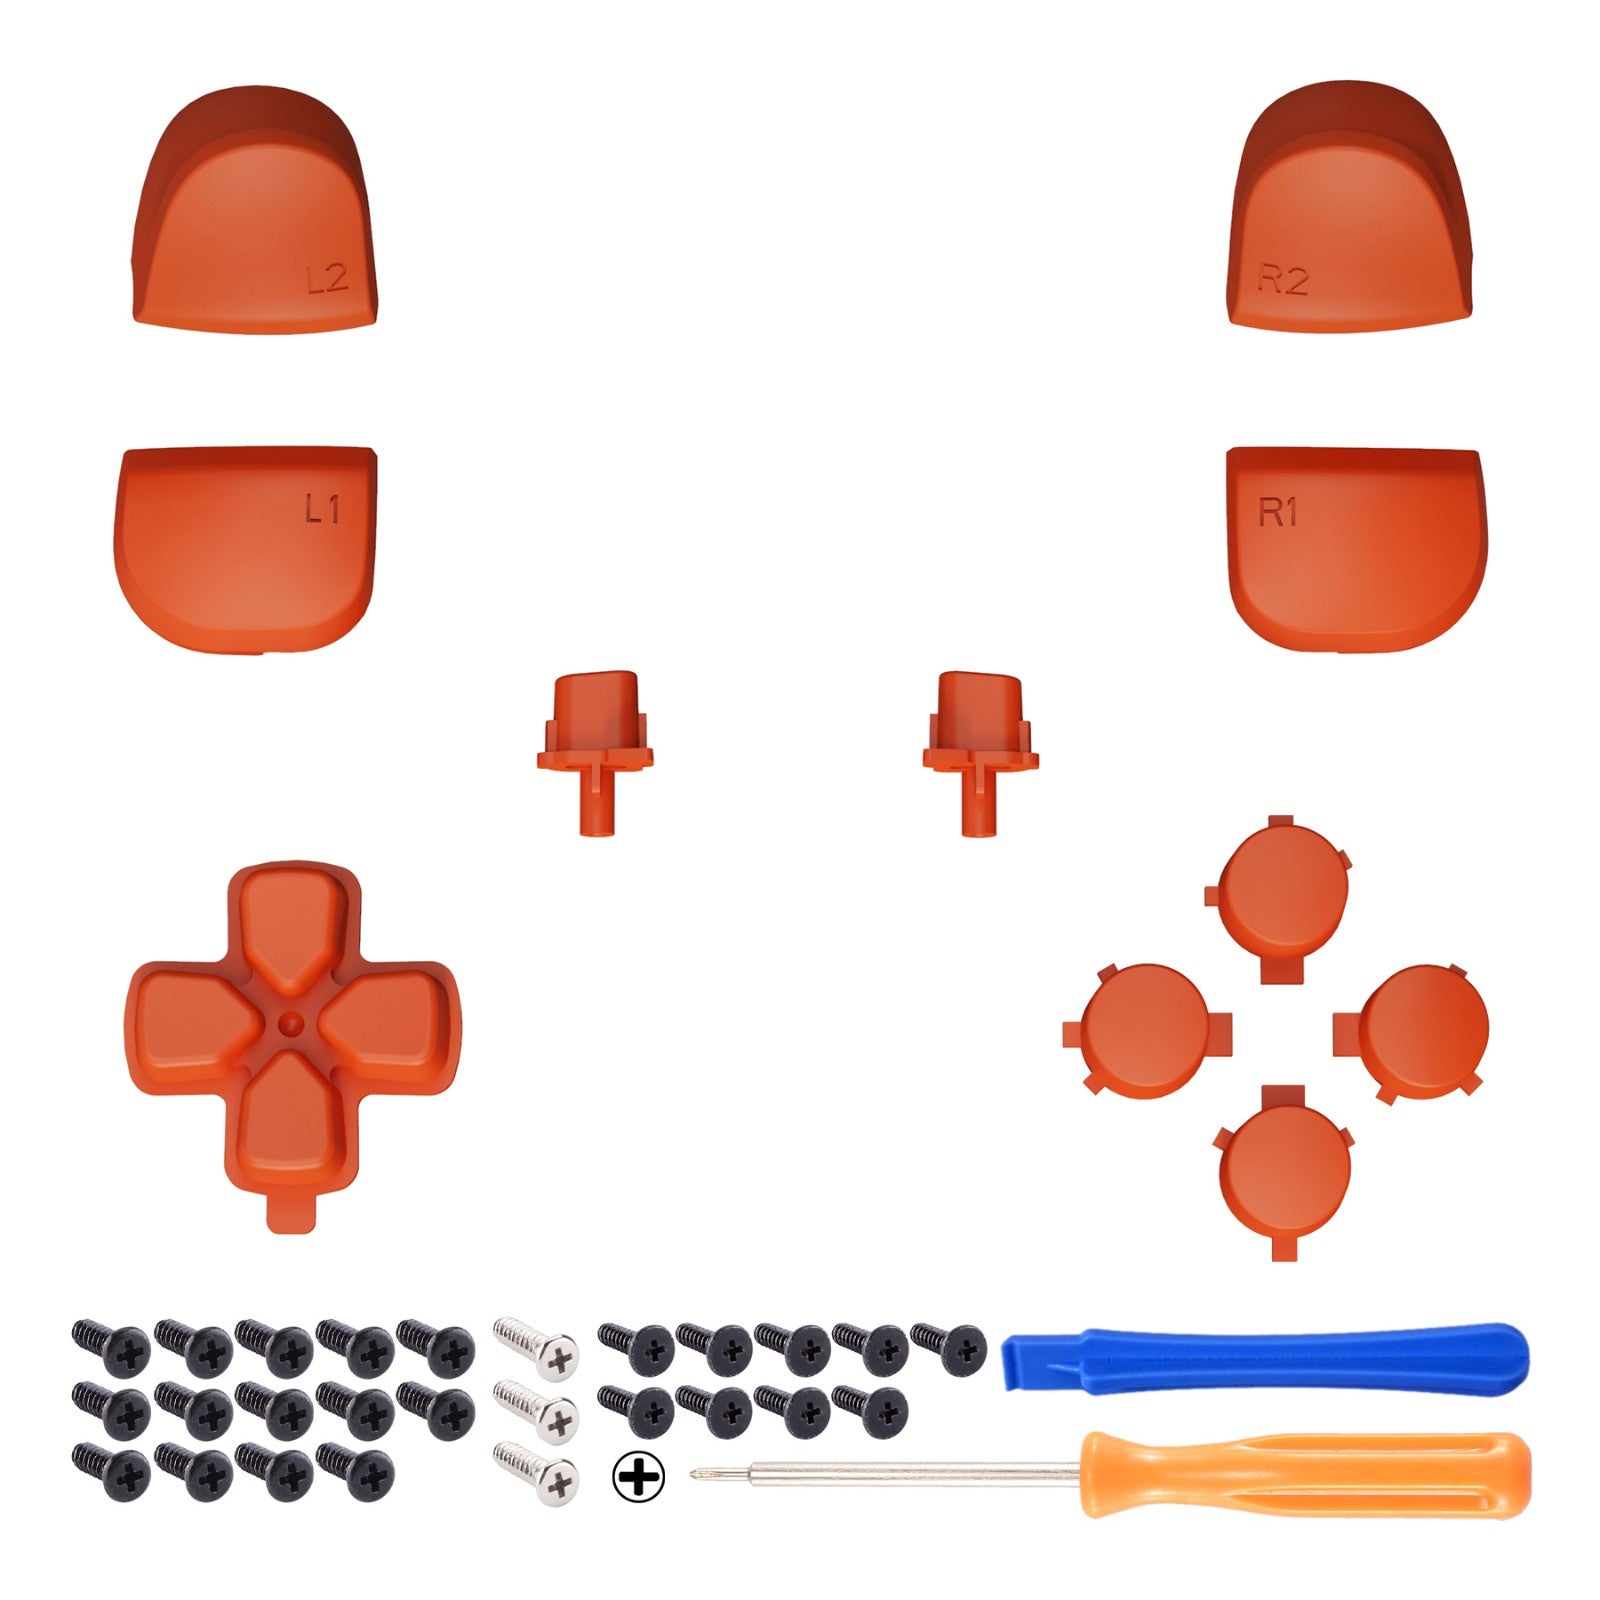 eXtremeRate Retail Replacement D-pad R1 L1 R2 L2 Triggers Share Options Face Buttons, Orange Full Set Buttons Compatible with ps5 Controller BDM-010 & BDM-020 - JPF1004G2